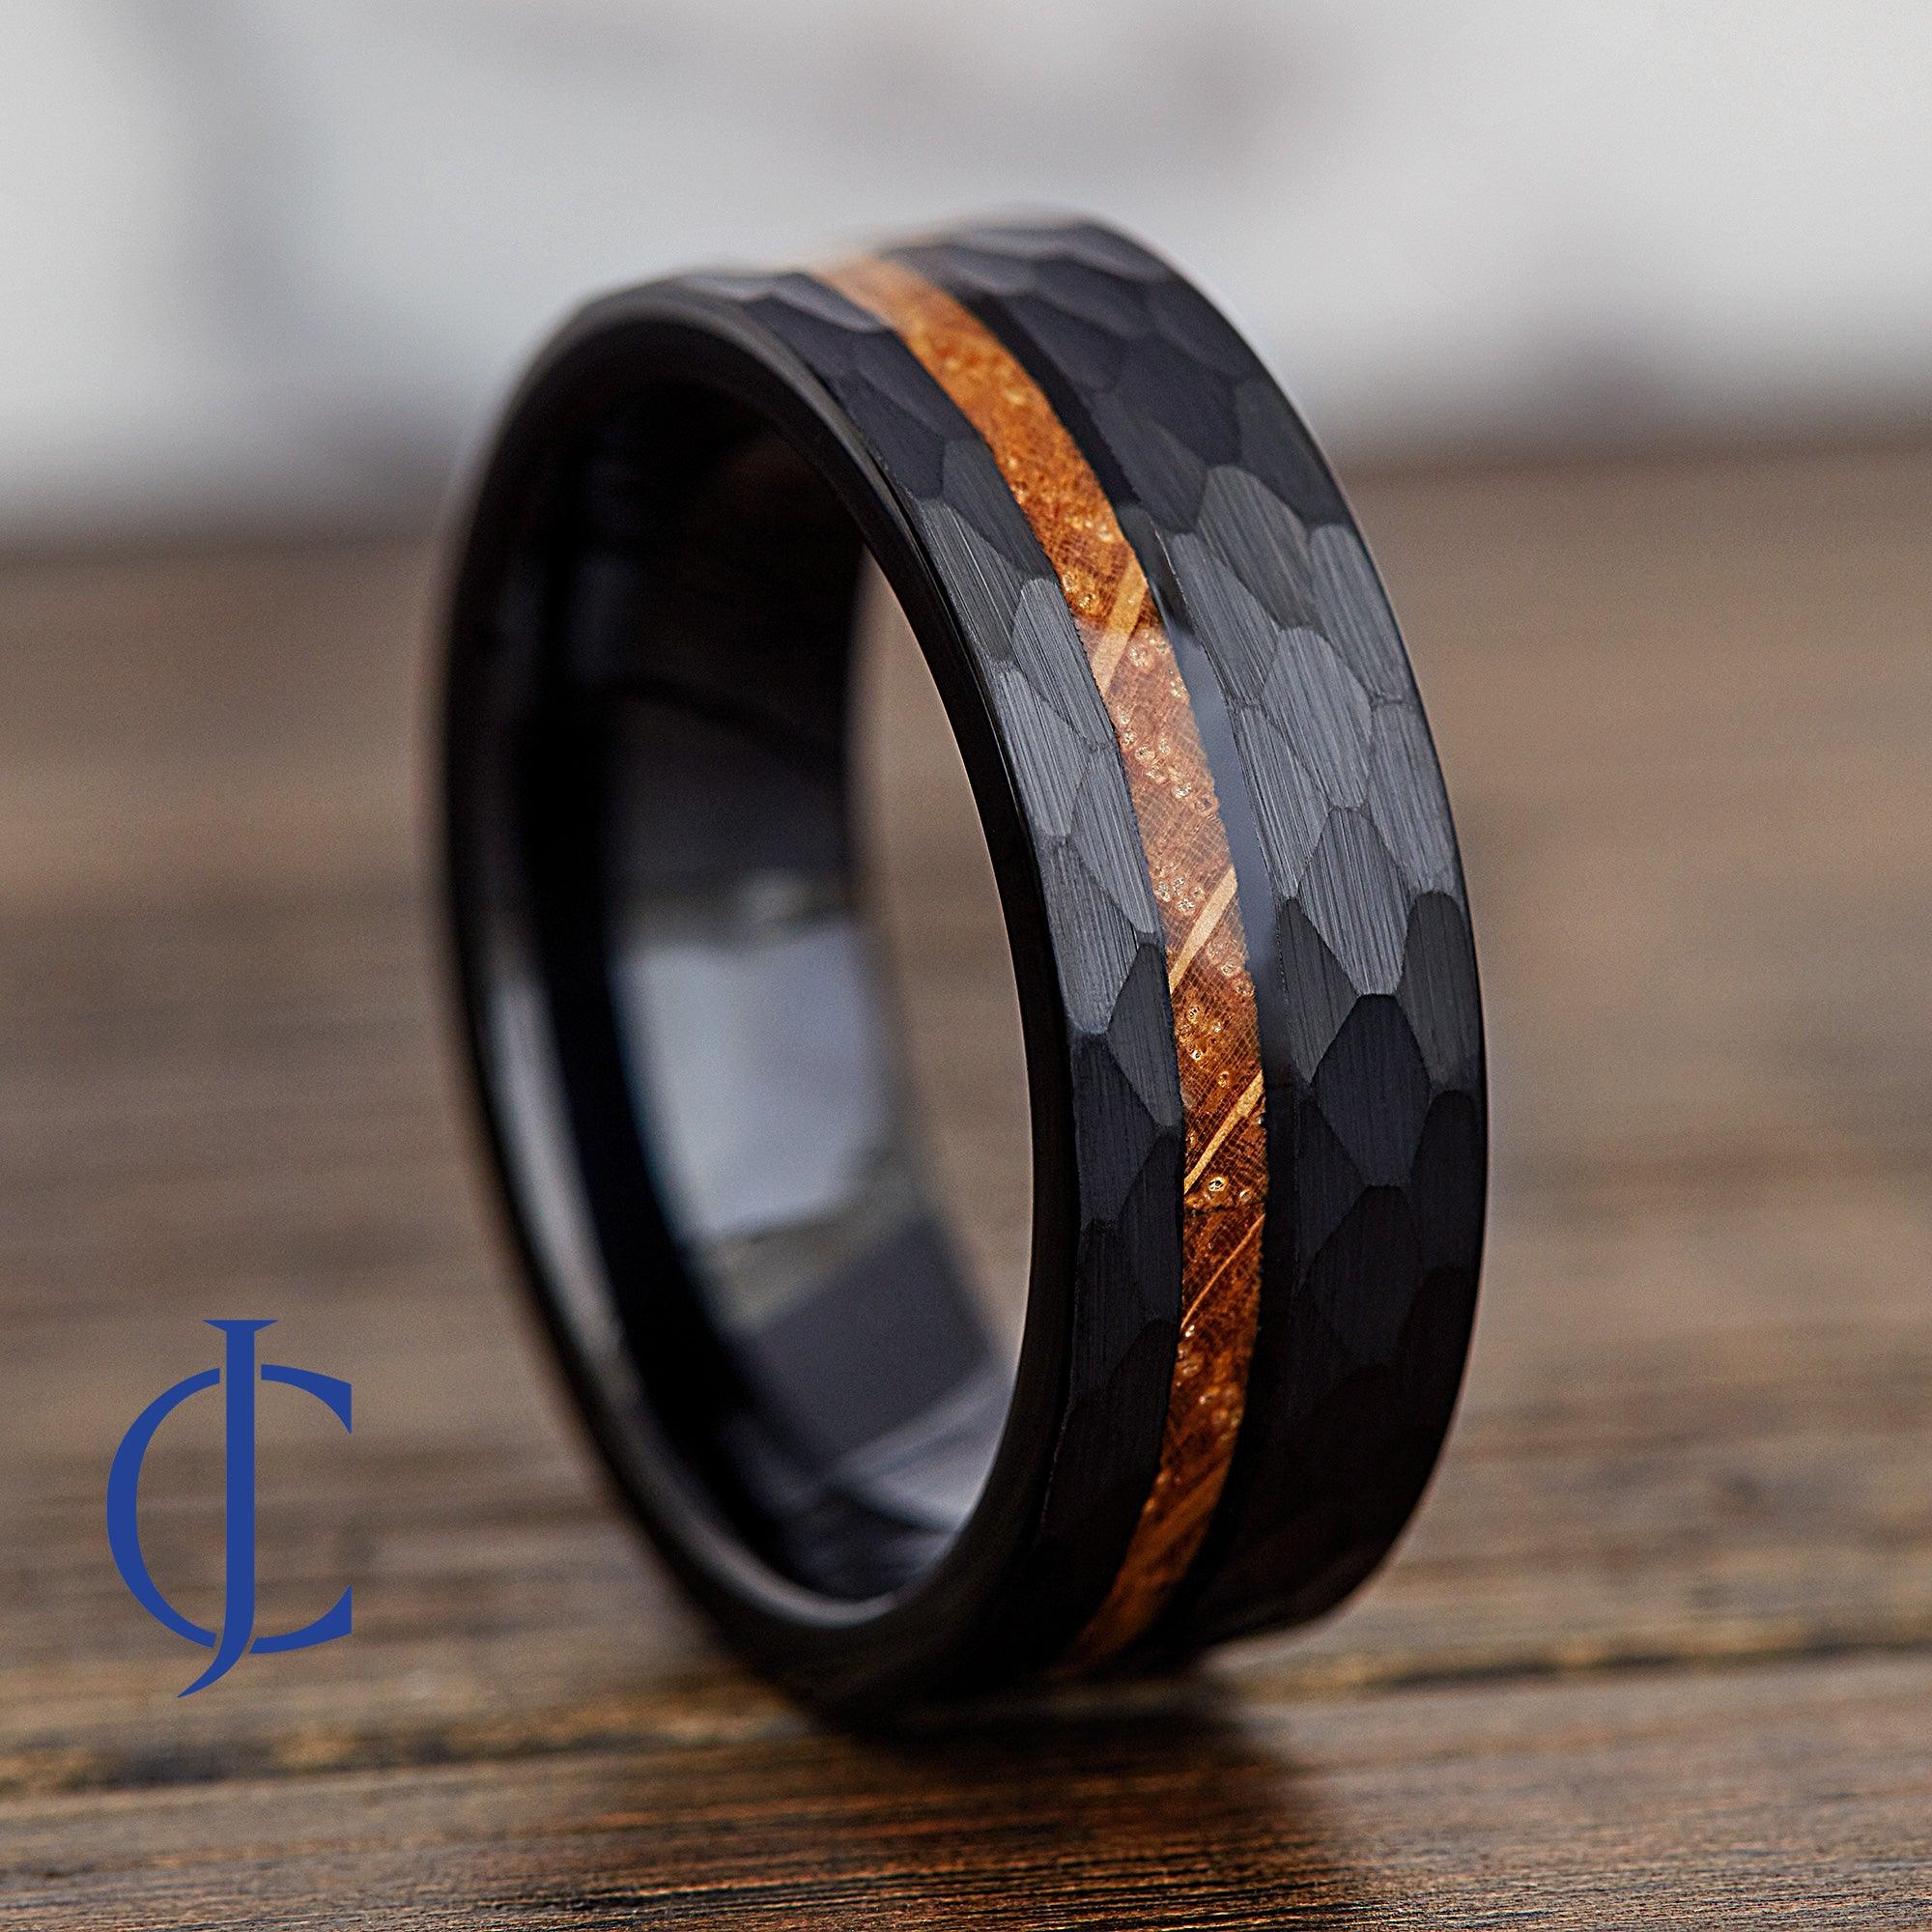 AXIOM Hammered Black Tungsten Ring with Whiskey Barrel Inlay - 8mm